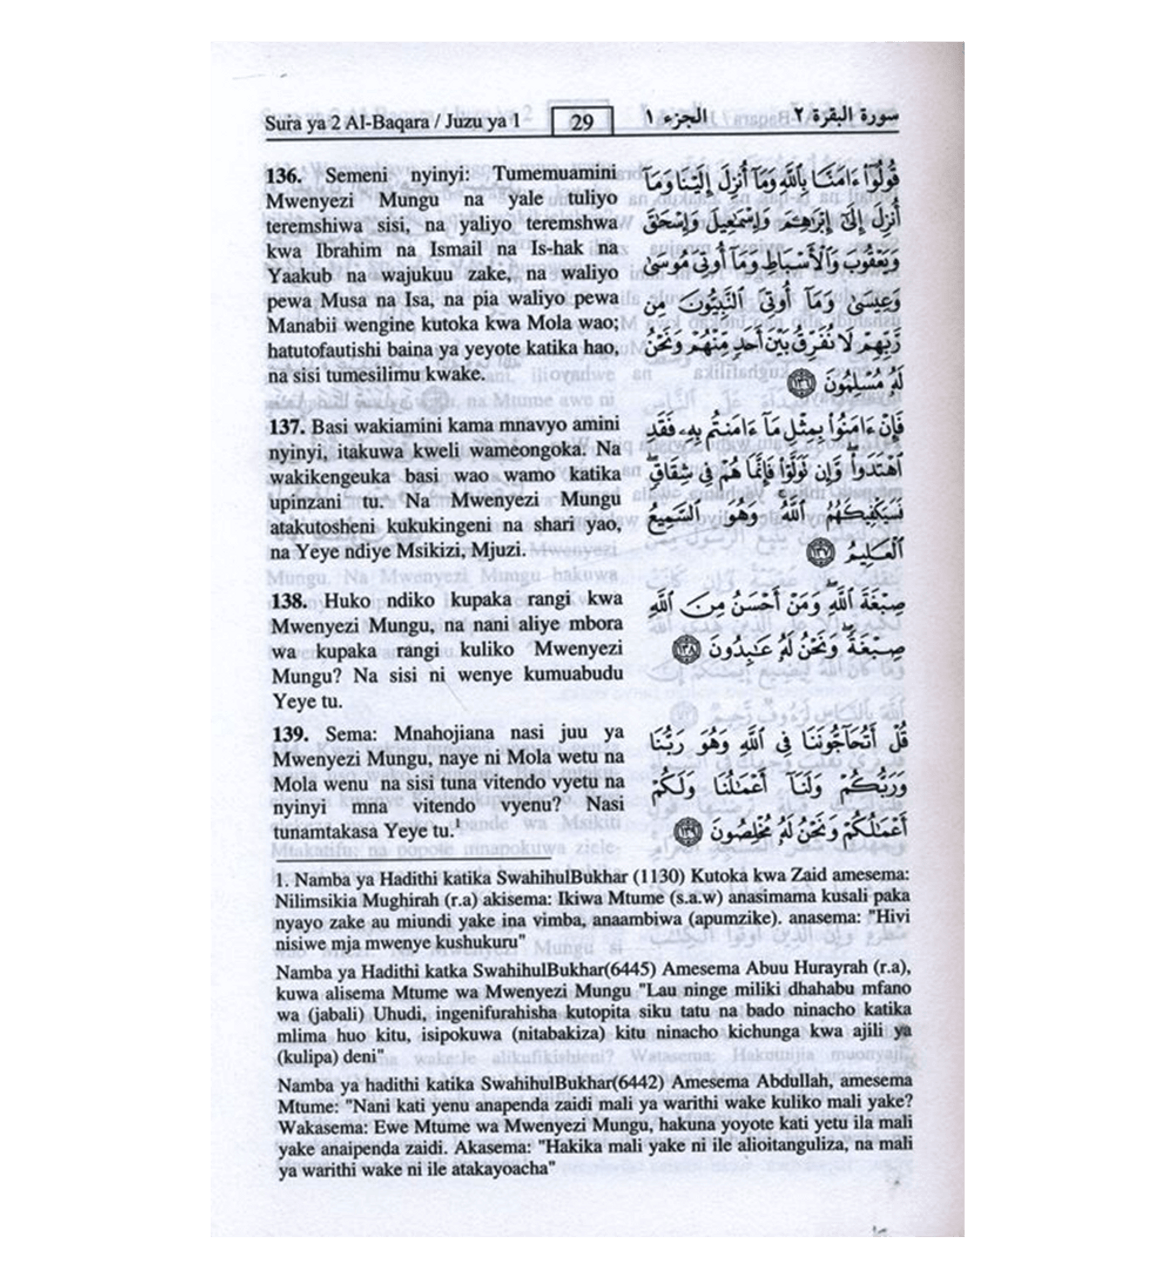 Swahili - Noble Quran (Quran with Translation)